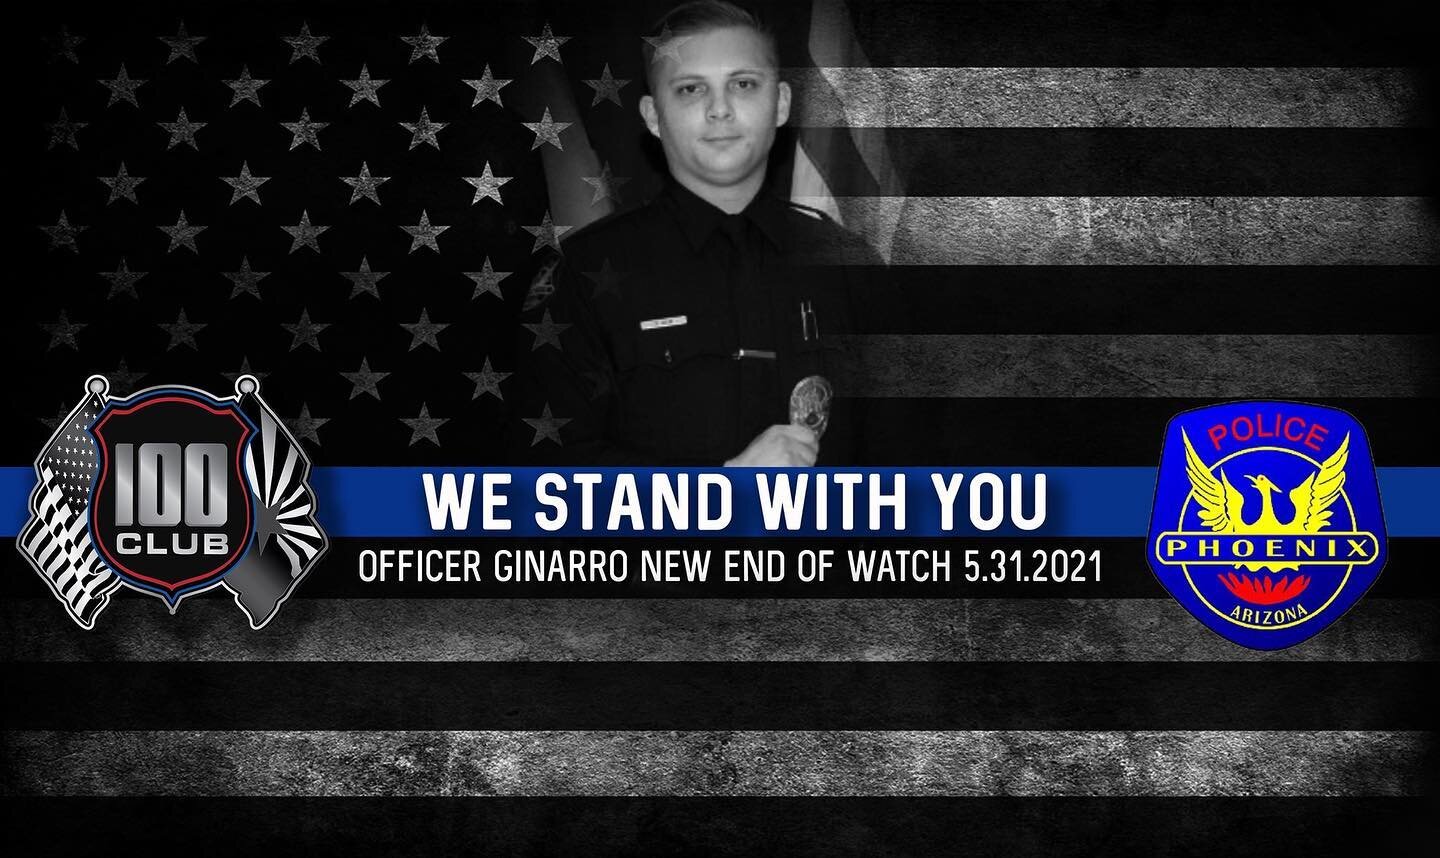 Today we stand beside the family, friends and colleagues of Fallen Phoenix Police Department Officer Ginarro New as they honor his life and service.

#GodSpeed #WeHaveItFromHere #EOW #NeverForget #100club #100clubaz #100clubofarizona #az100club #offi